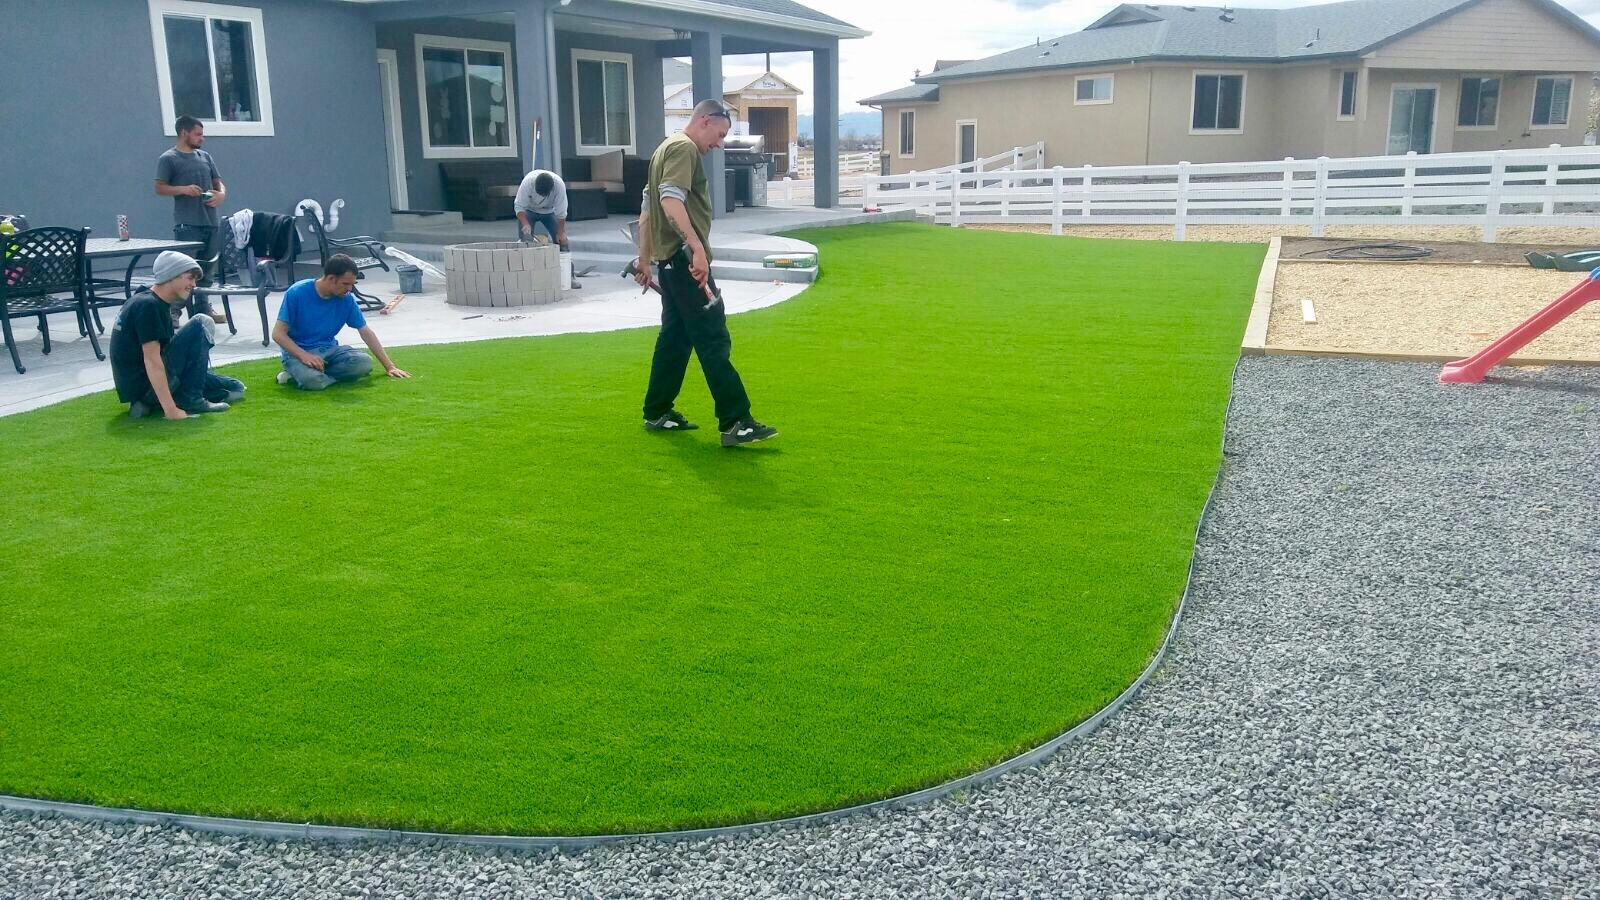 Is DIY or Hiring a Professional Installer for Grass Carpet in My Home Lawn?